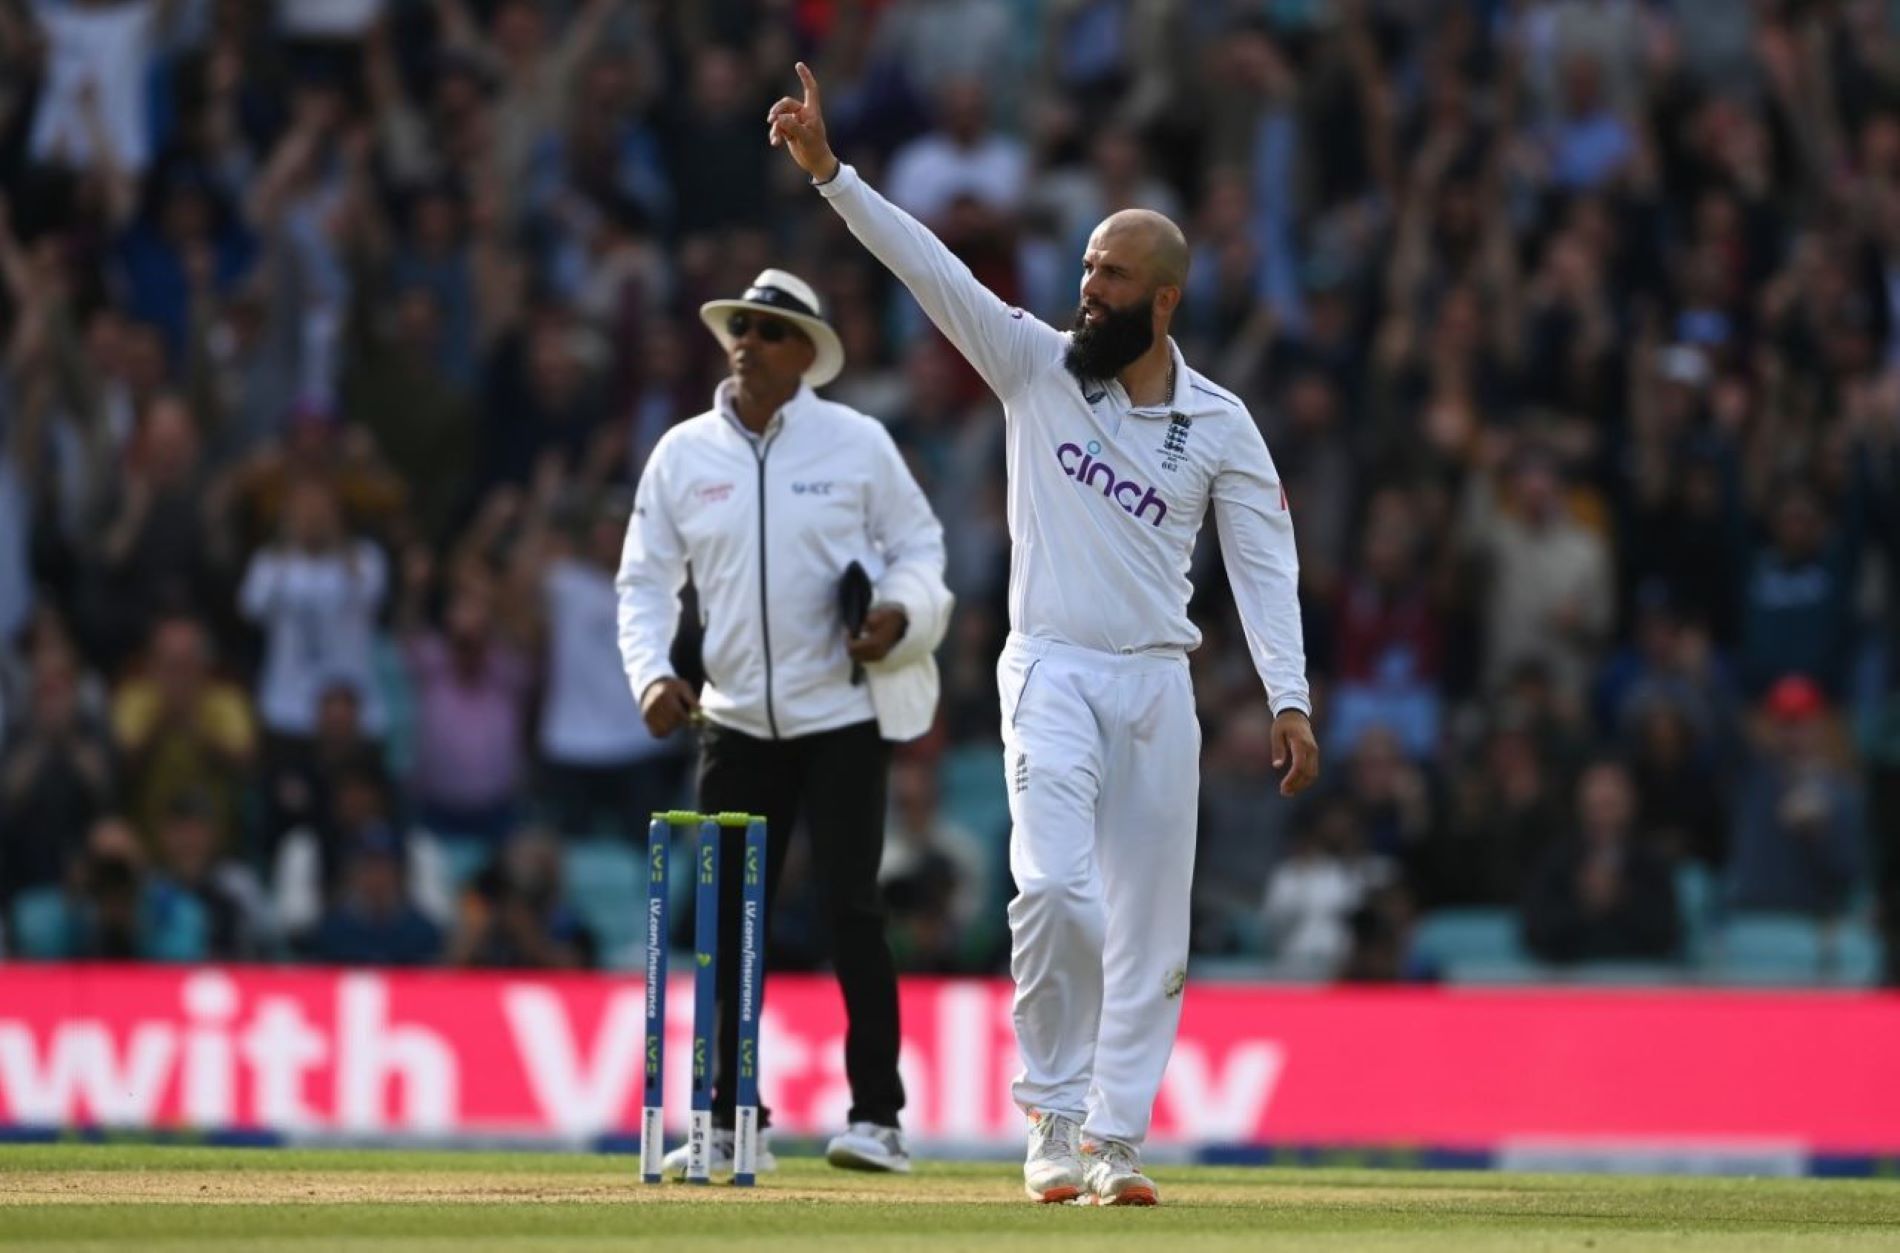 Moeen Ali had a sensational finish to the Ashes series at the Oval